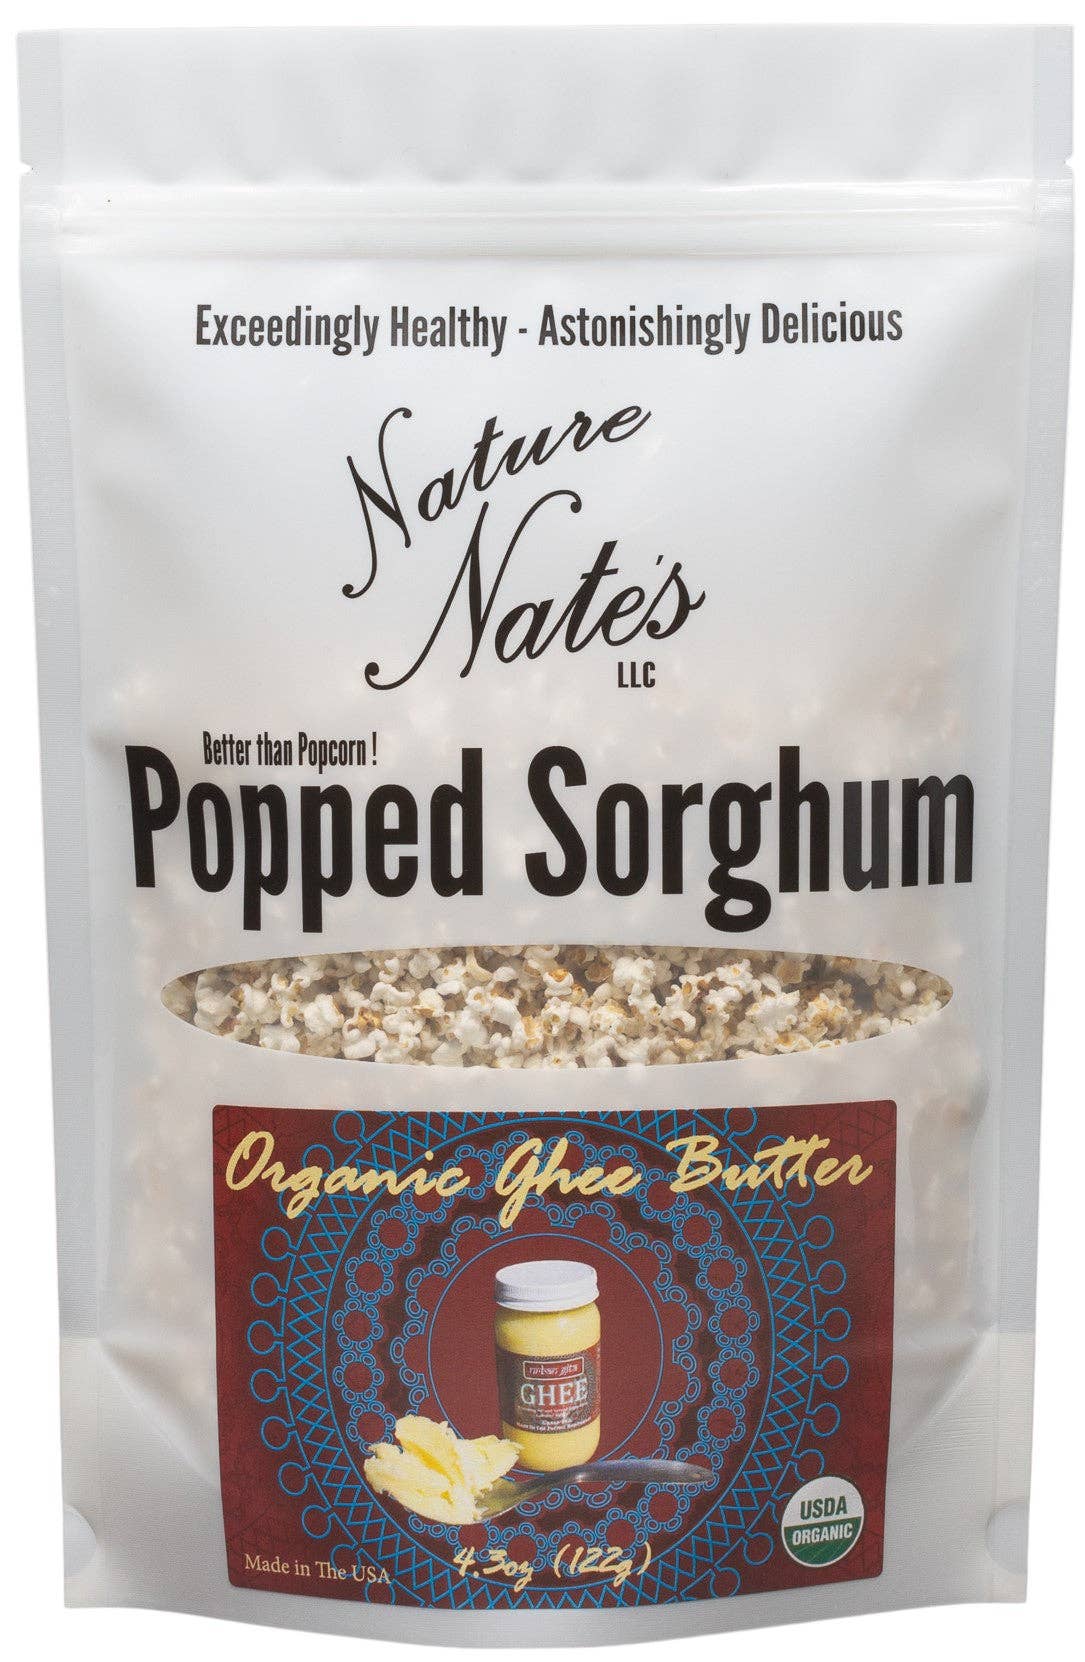 Organic Popped Sorghum with Ghee Butter: 4.3 oz